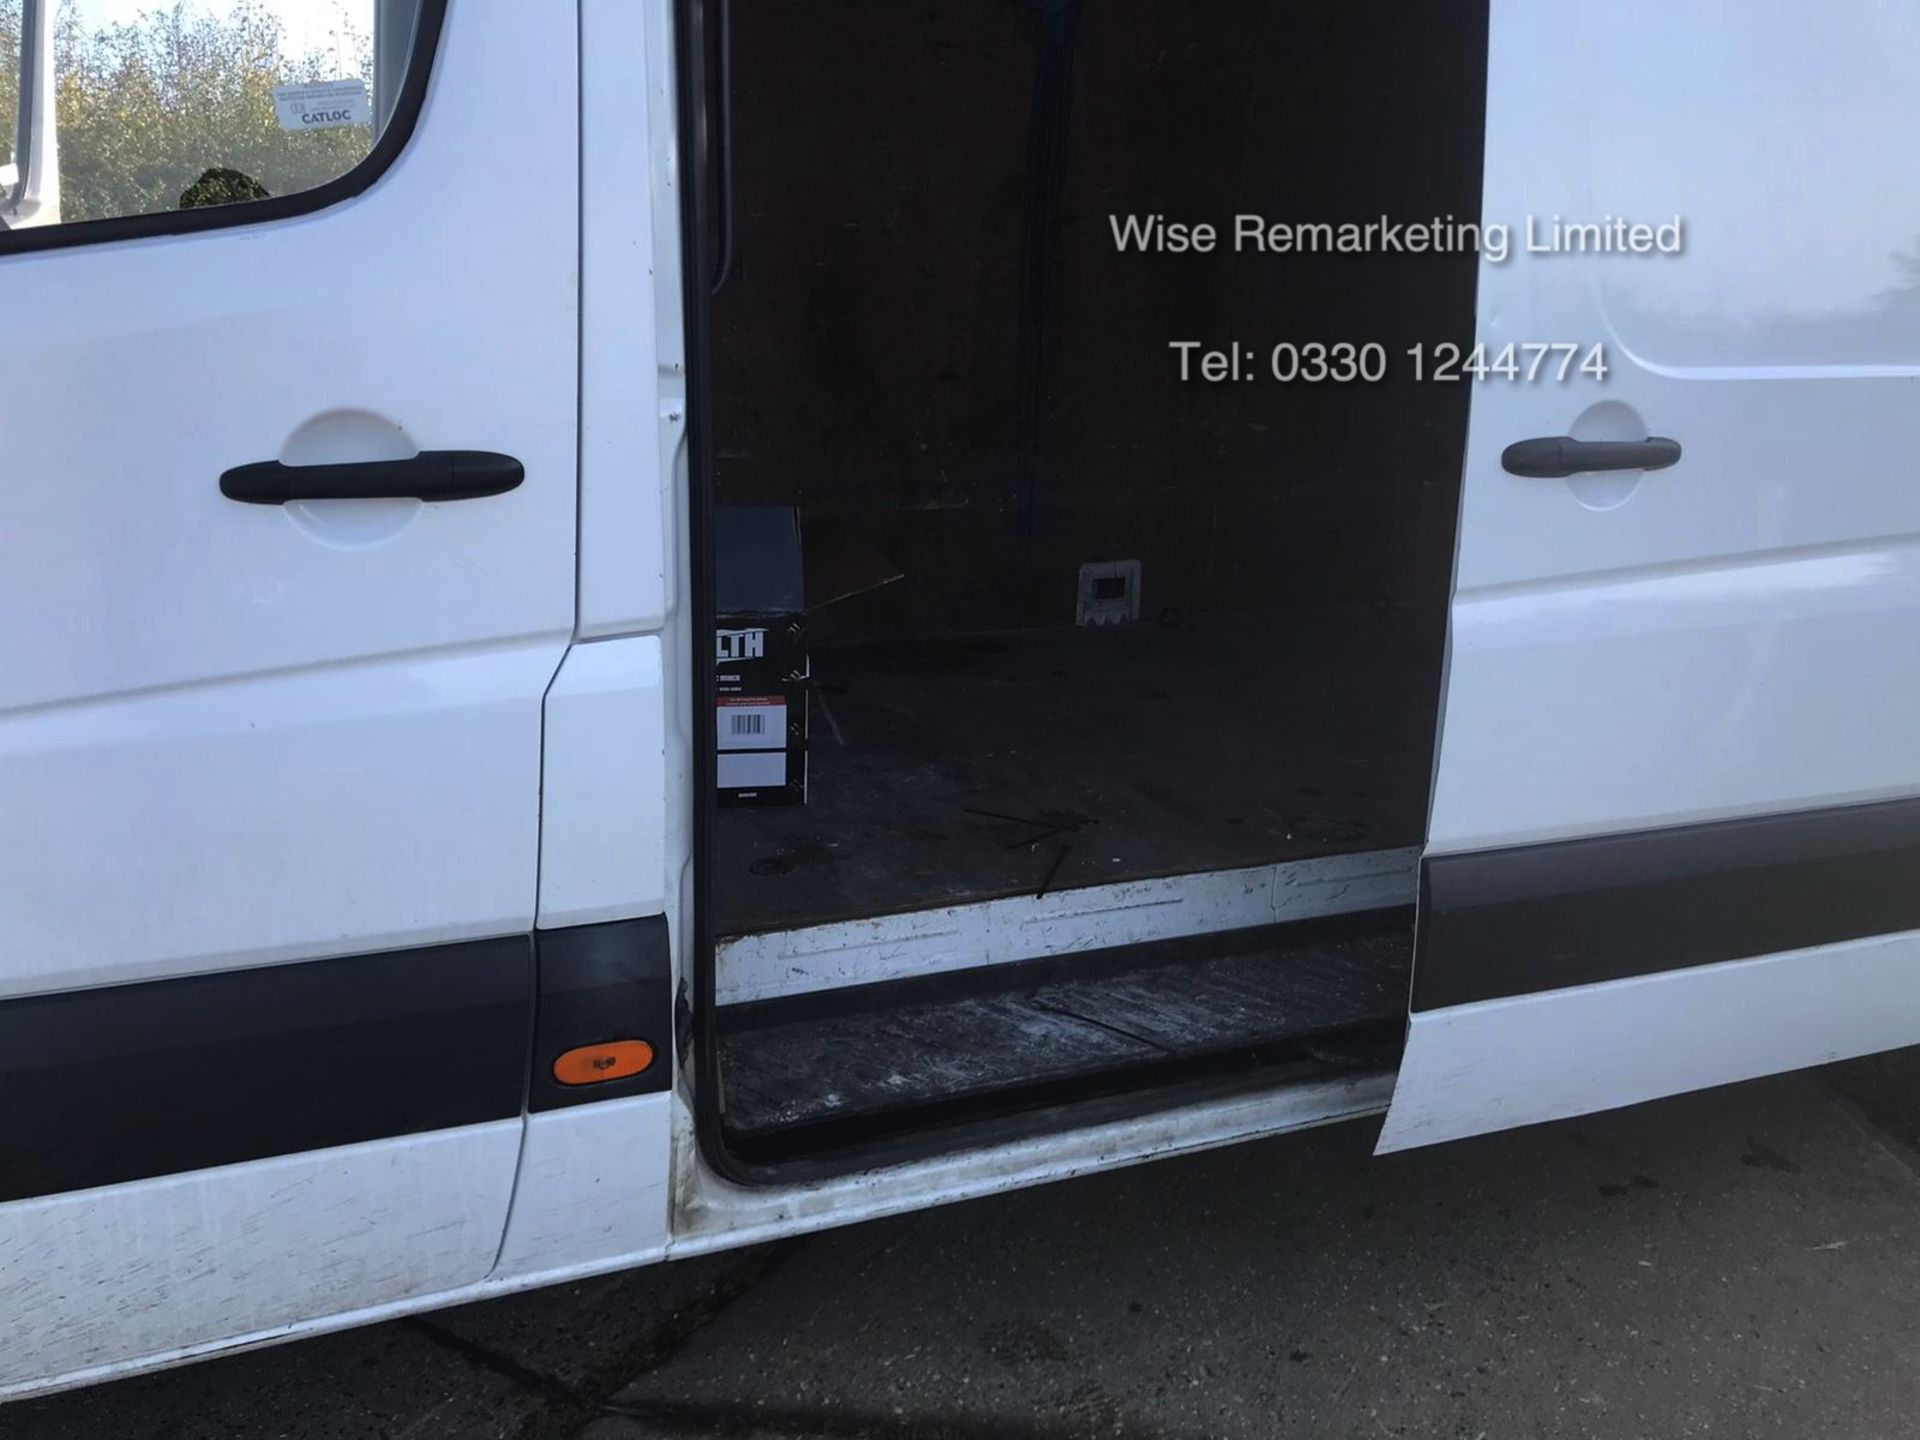 Mercedes Sprinter 313cdi 2.1l - LWB - 2014 Model - 1 Keeper From New - SAVE 20% NO VAT - Image 5 of 19